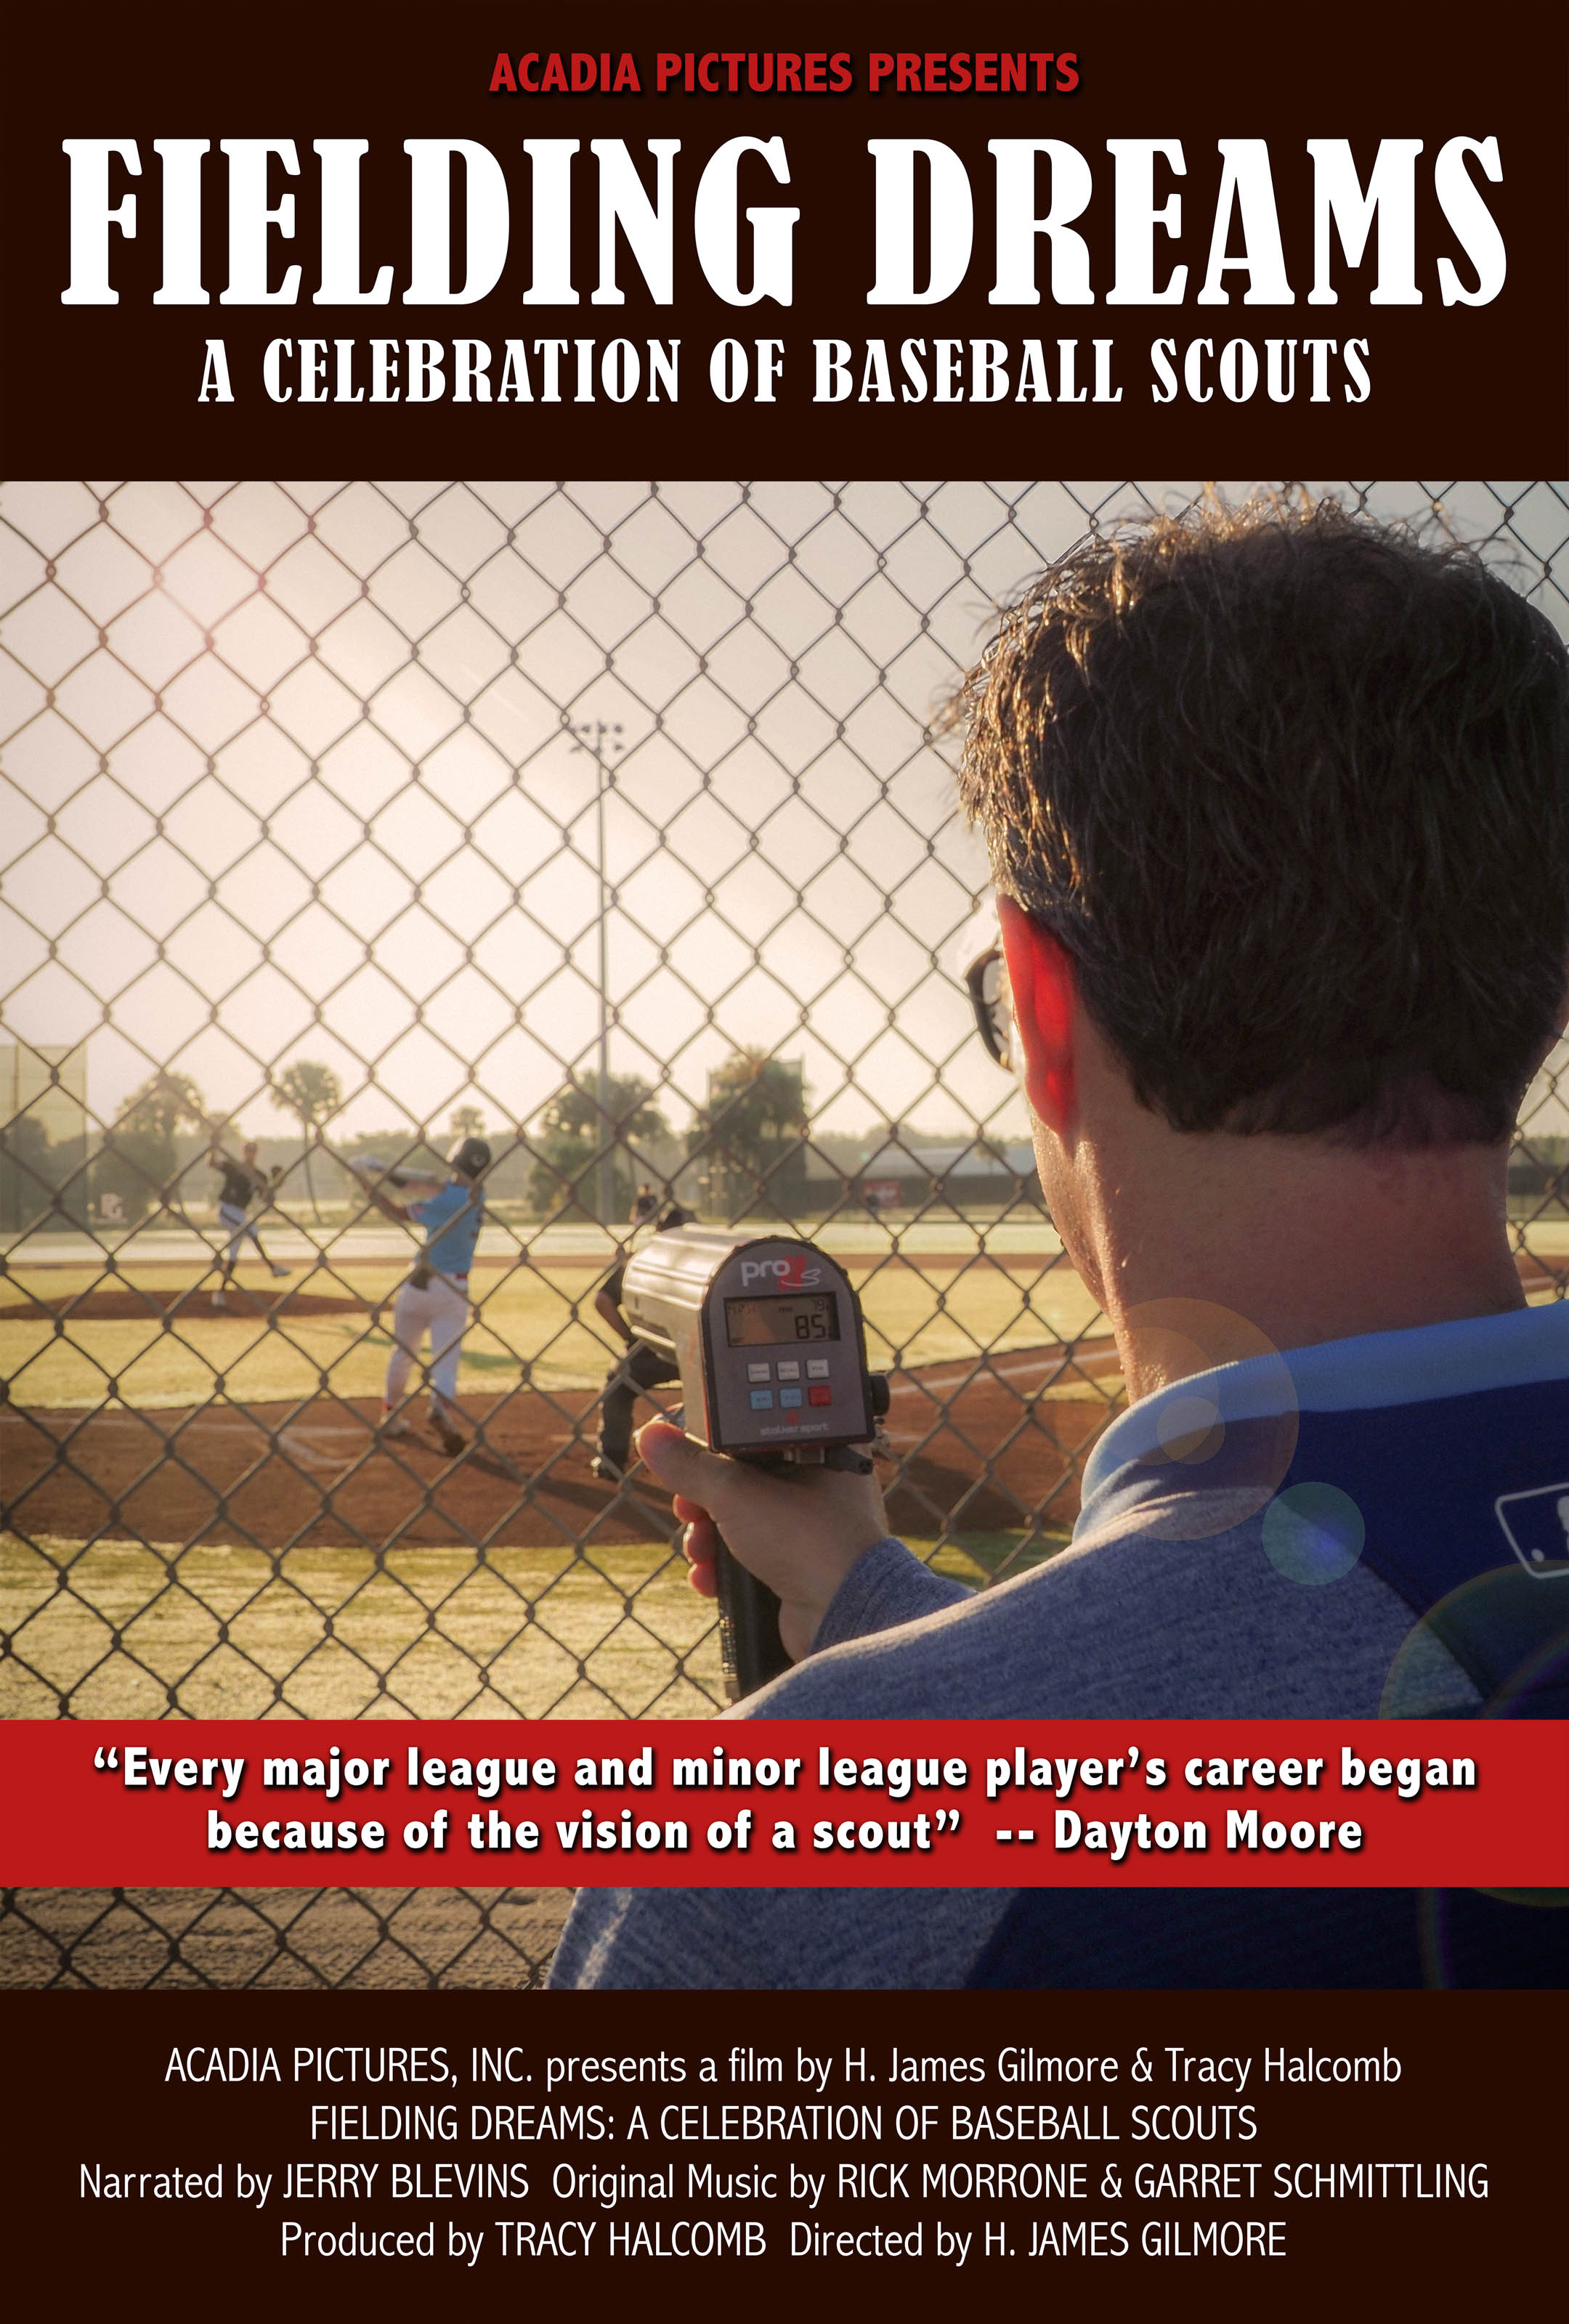 A film poster for "Fielding Dreams," featuring a person with a radar speed gun pointing it at a batter taking a swing on a baseball field